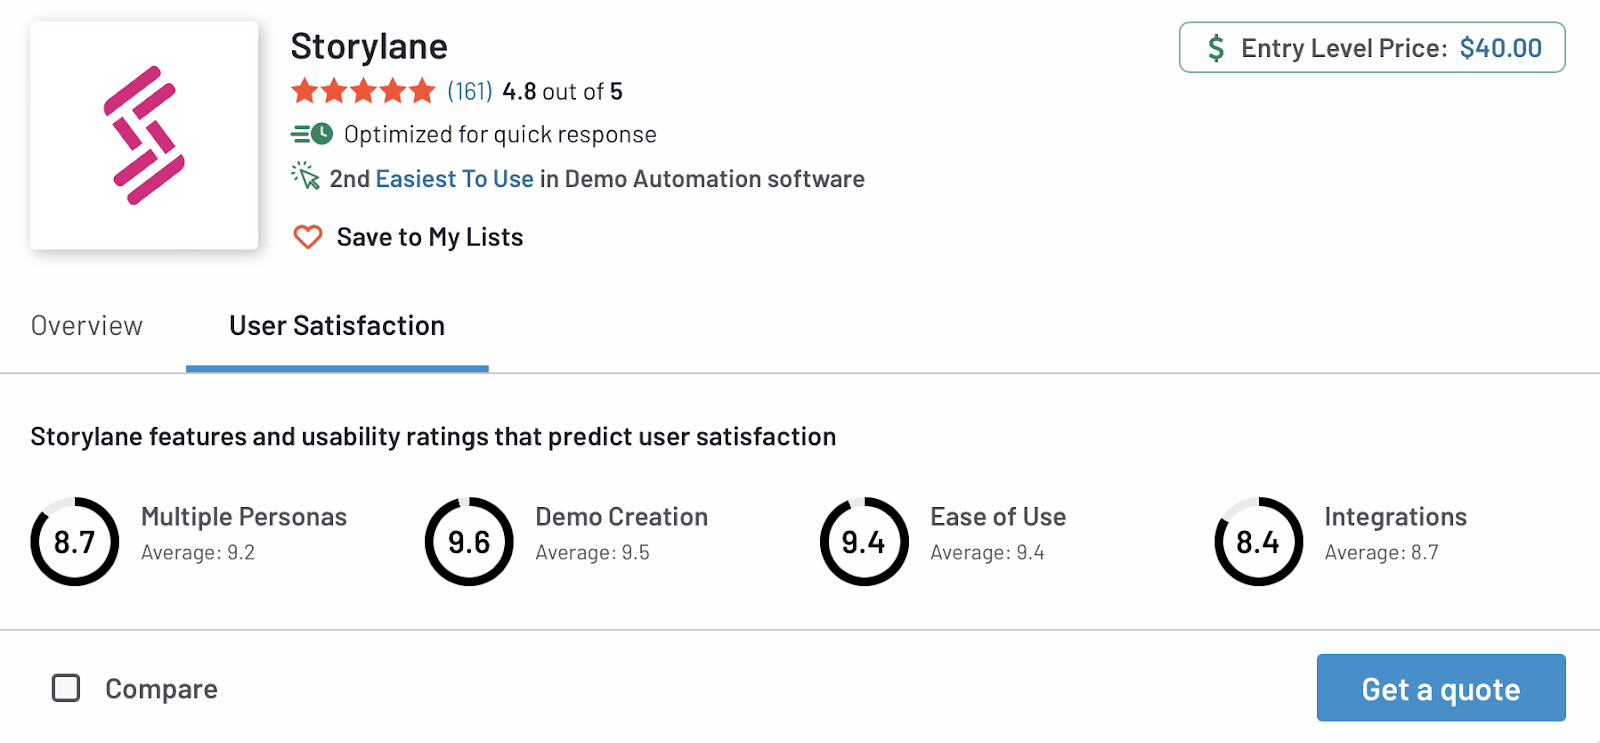 Storylane is ranked 2nd Easiest to Use in the demo automation category by G2